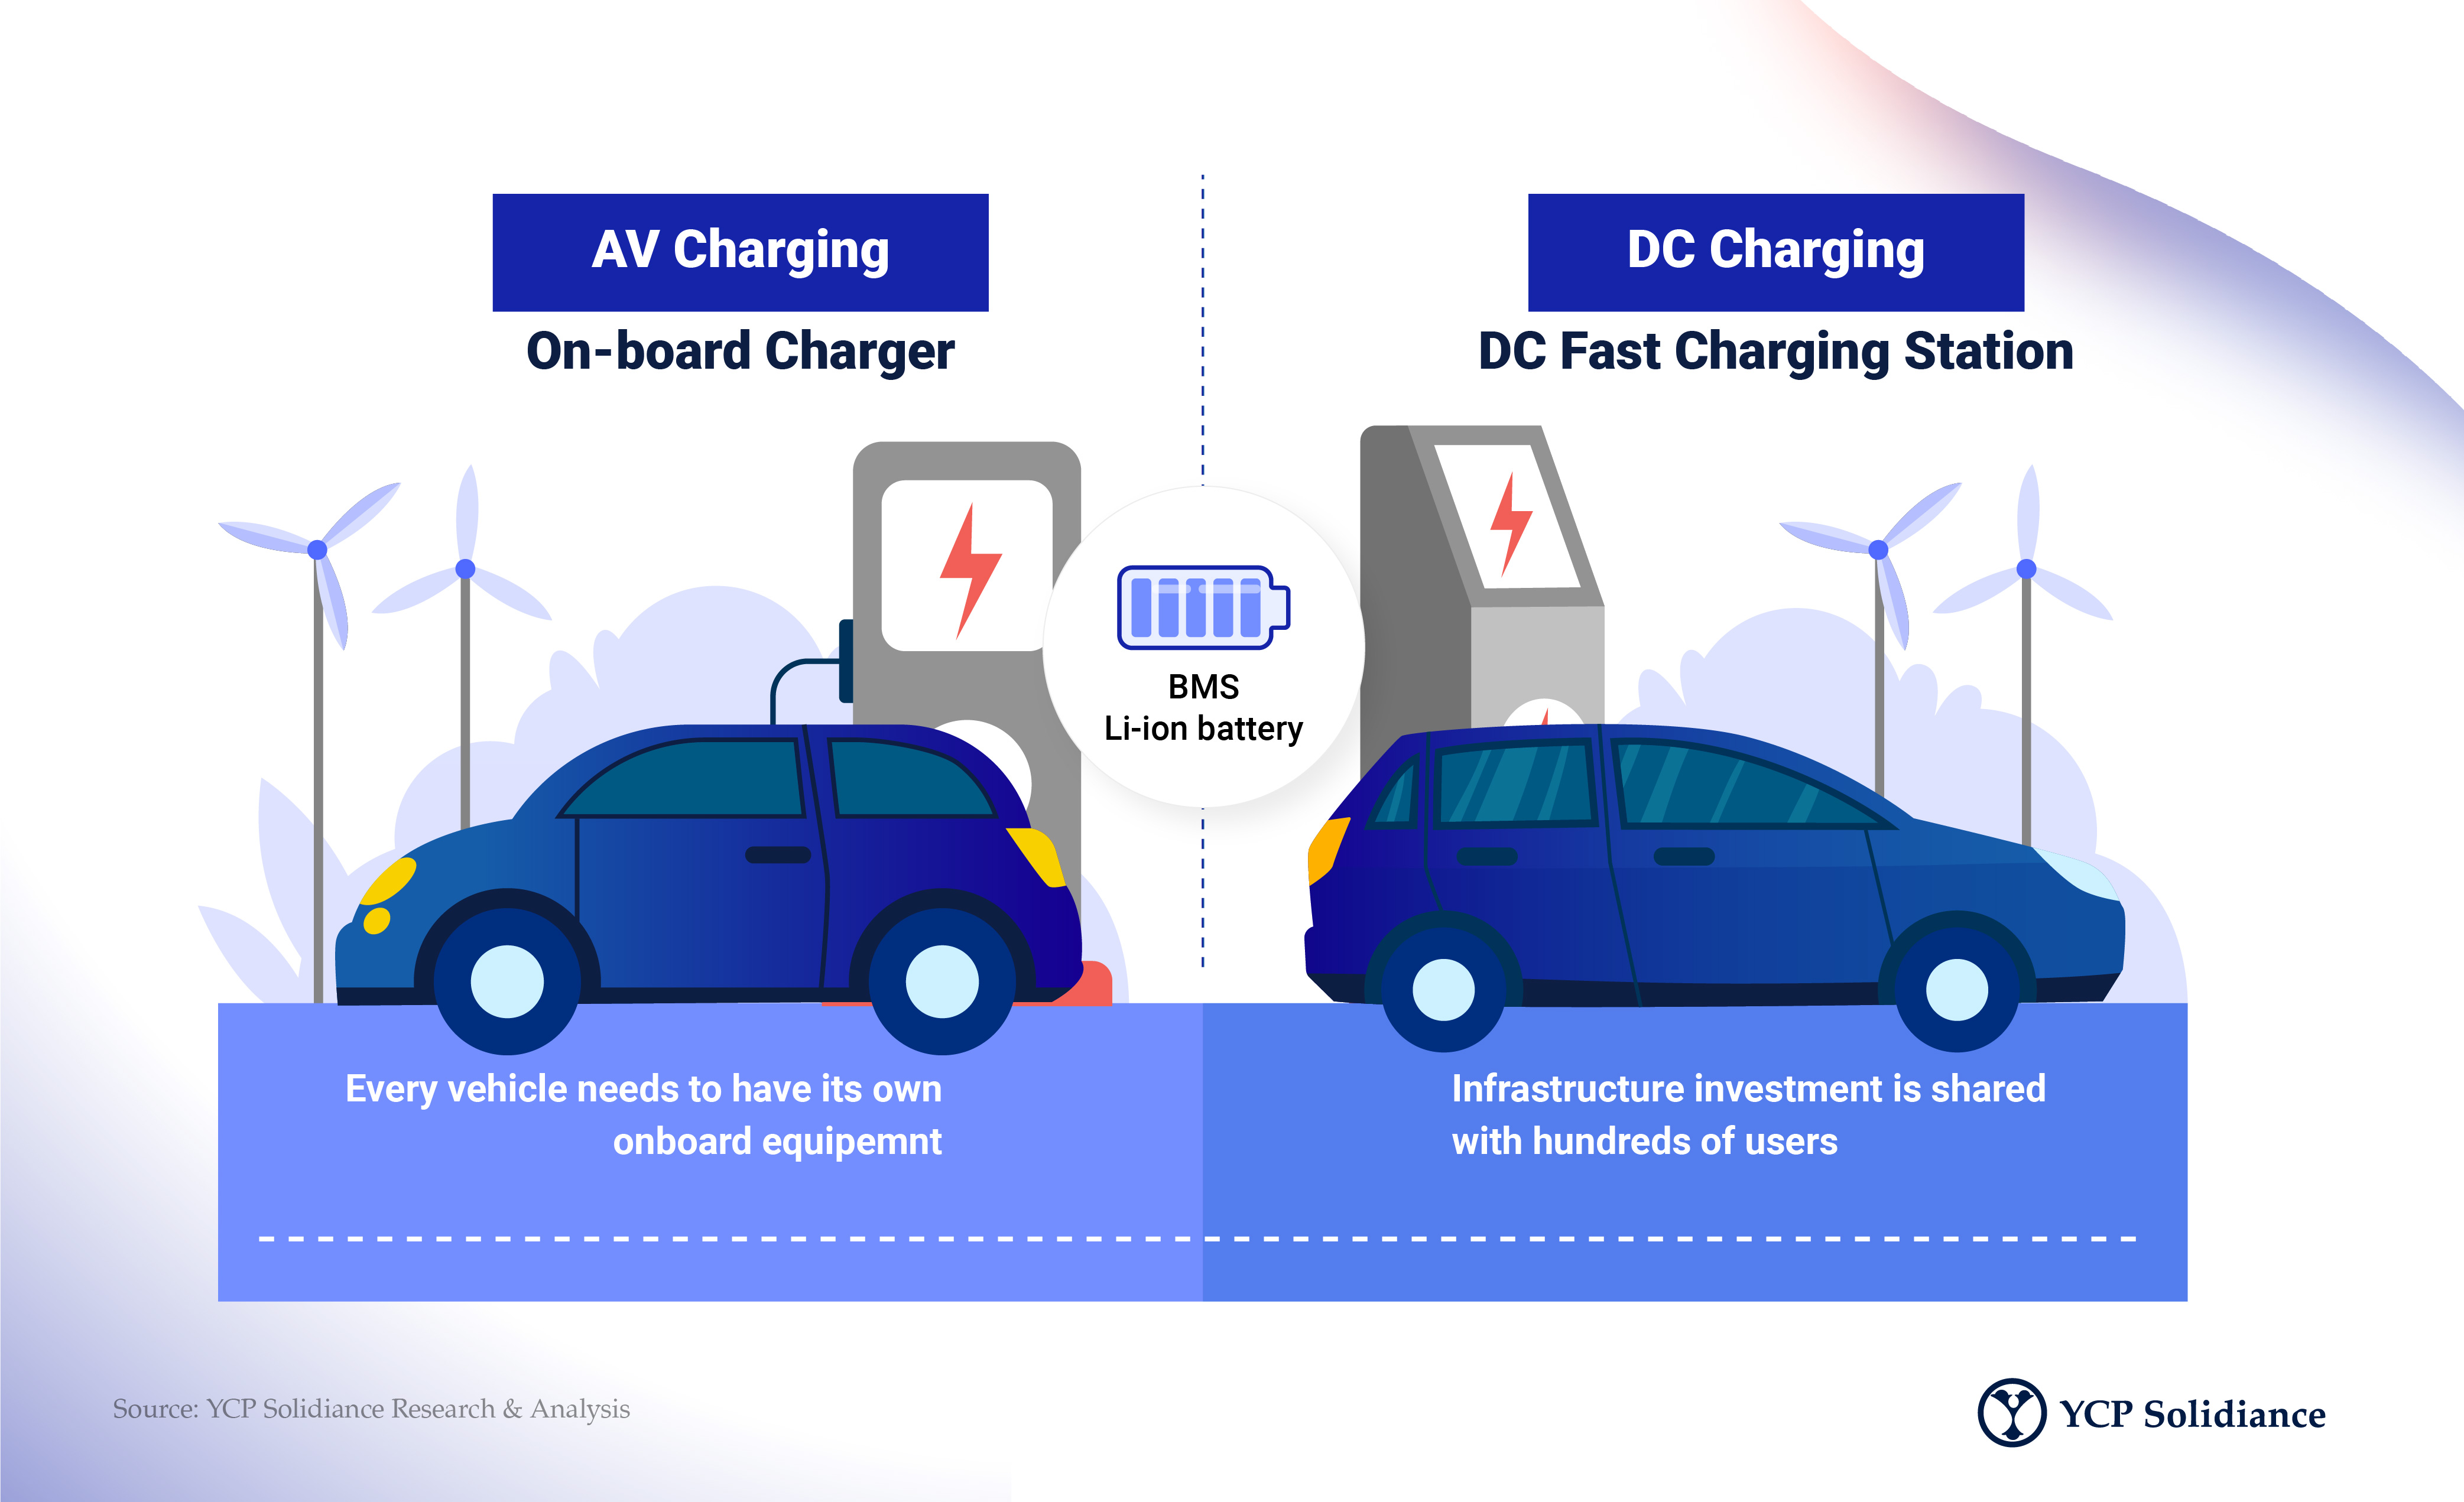 Thailand’s Roadmap to Accelerating Electric Vehicle Industry Growth